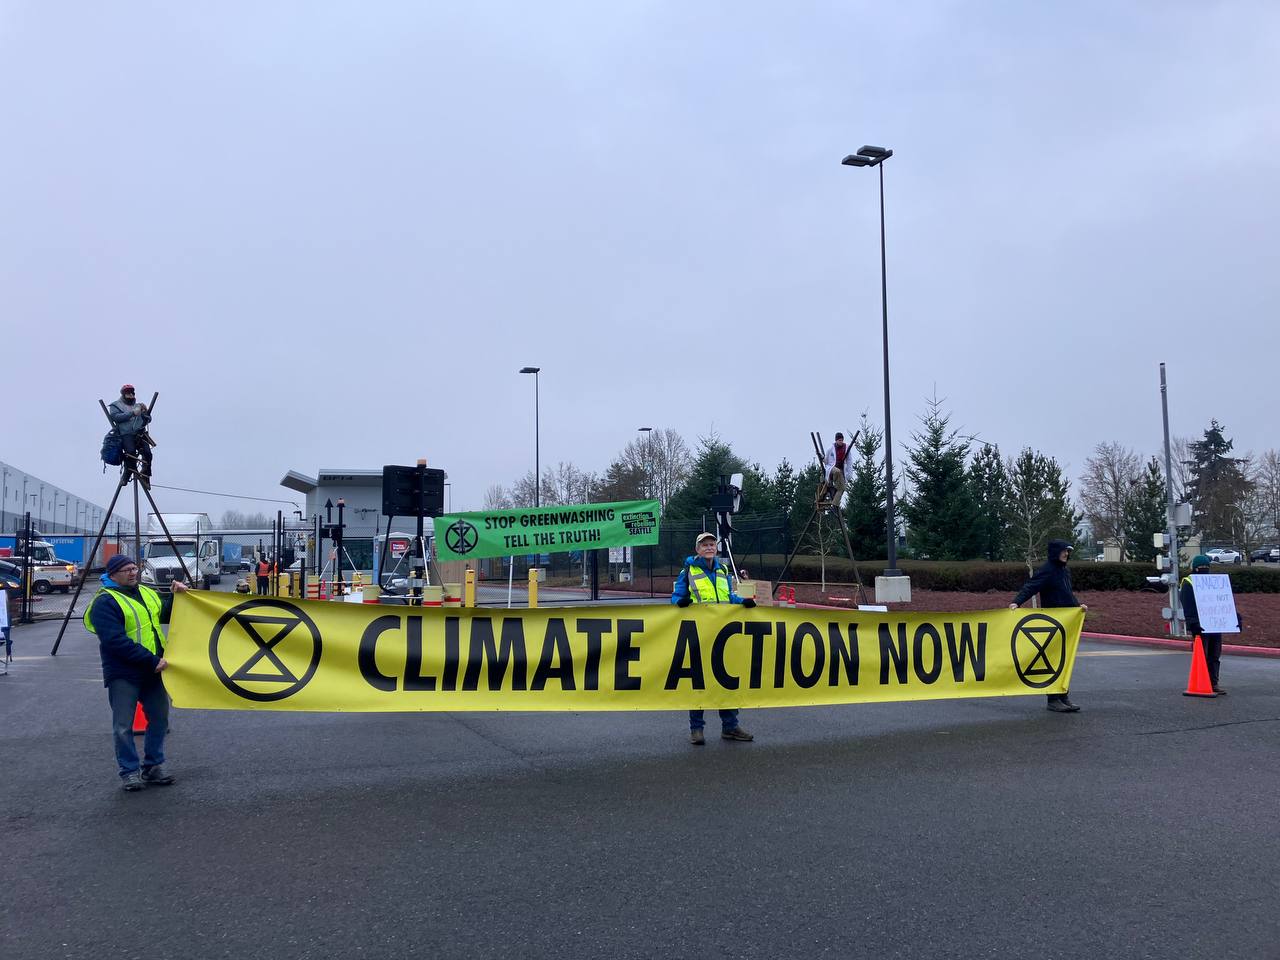 Blockading Amazon BFI4 fulfillment center with tripods and banners